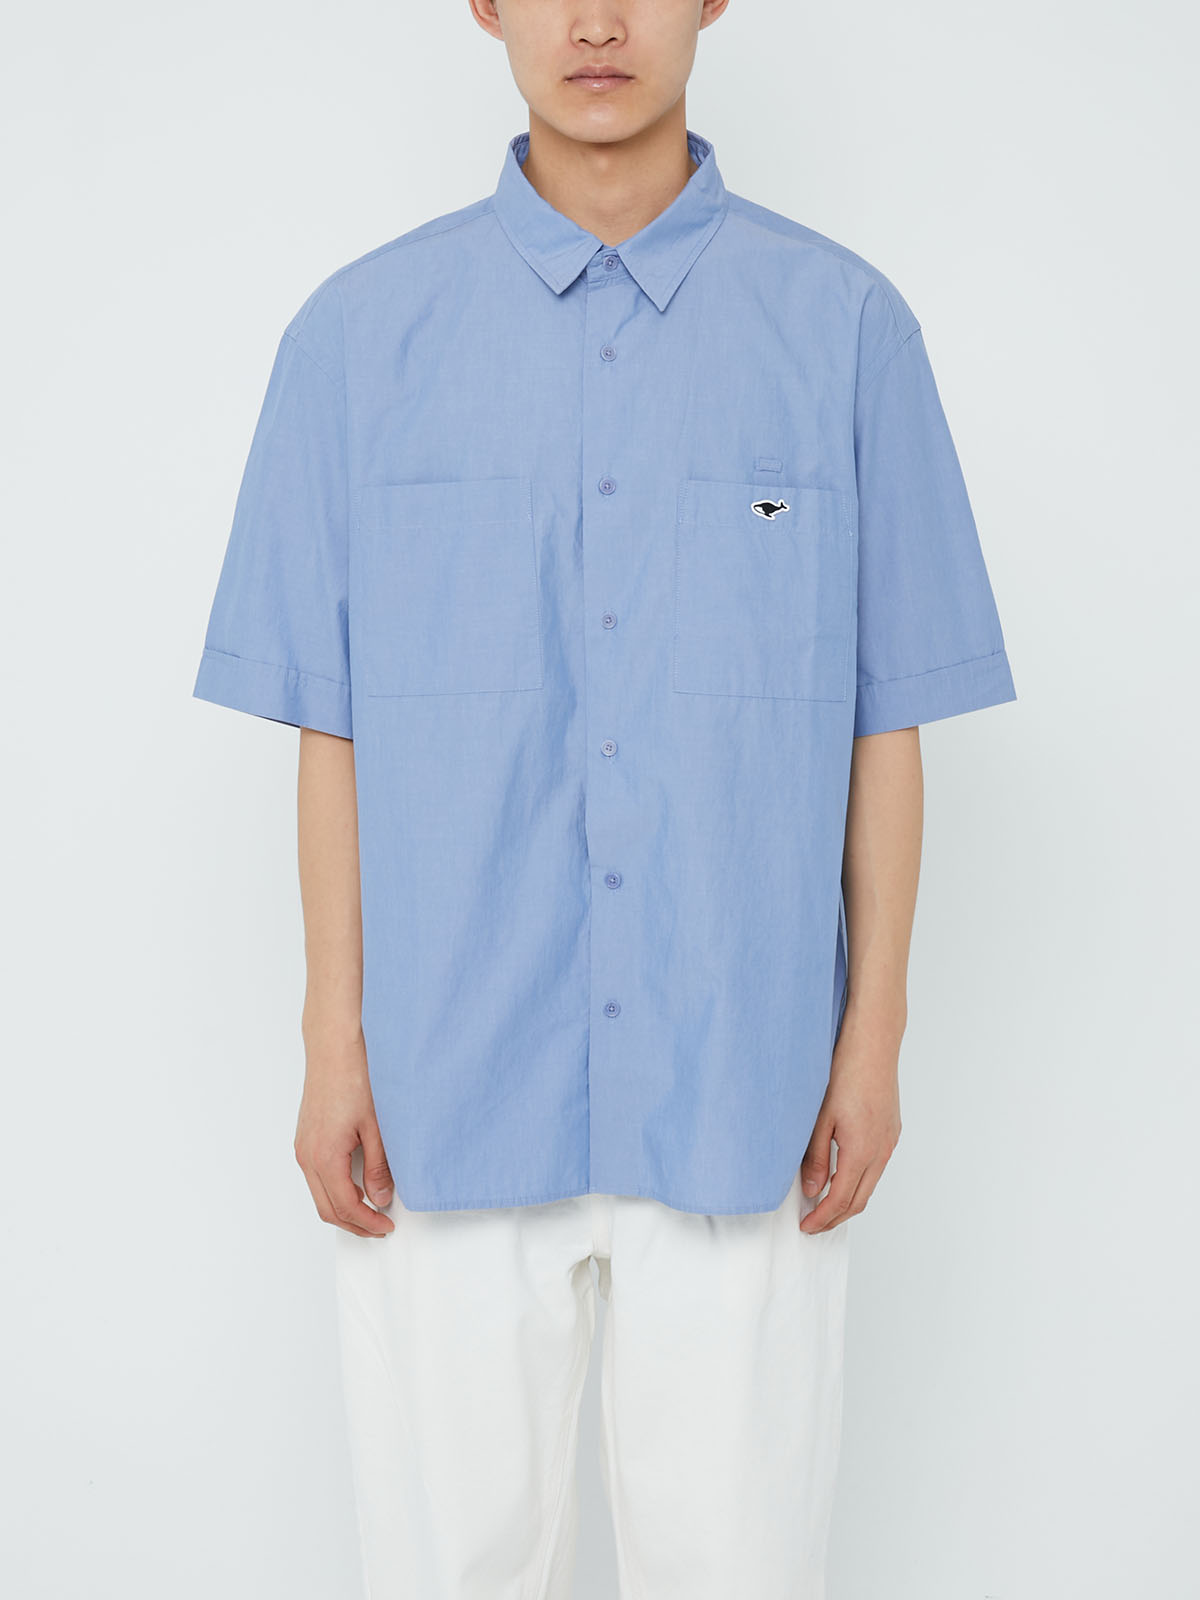 RELAXED S/S SHIRT (SAX)